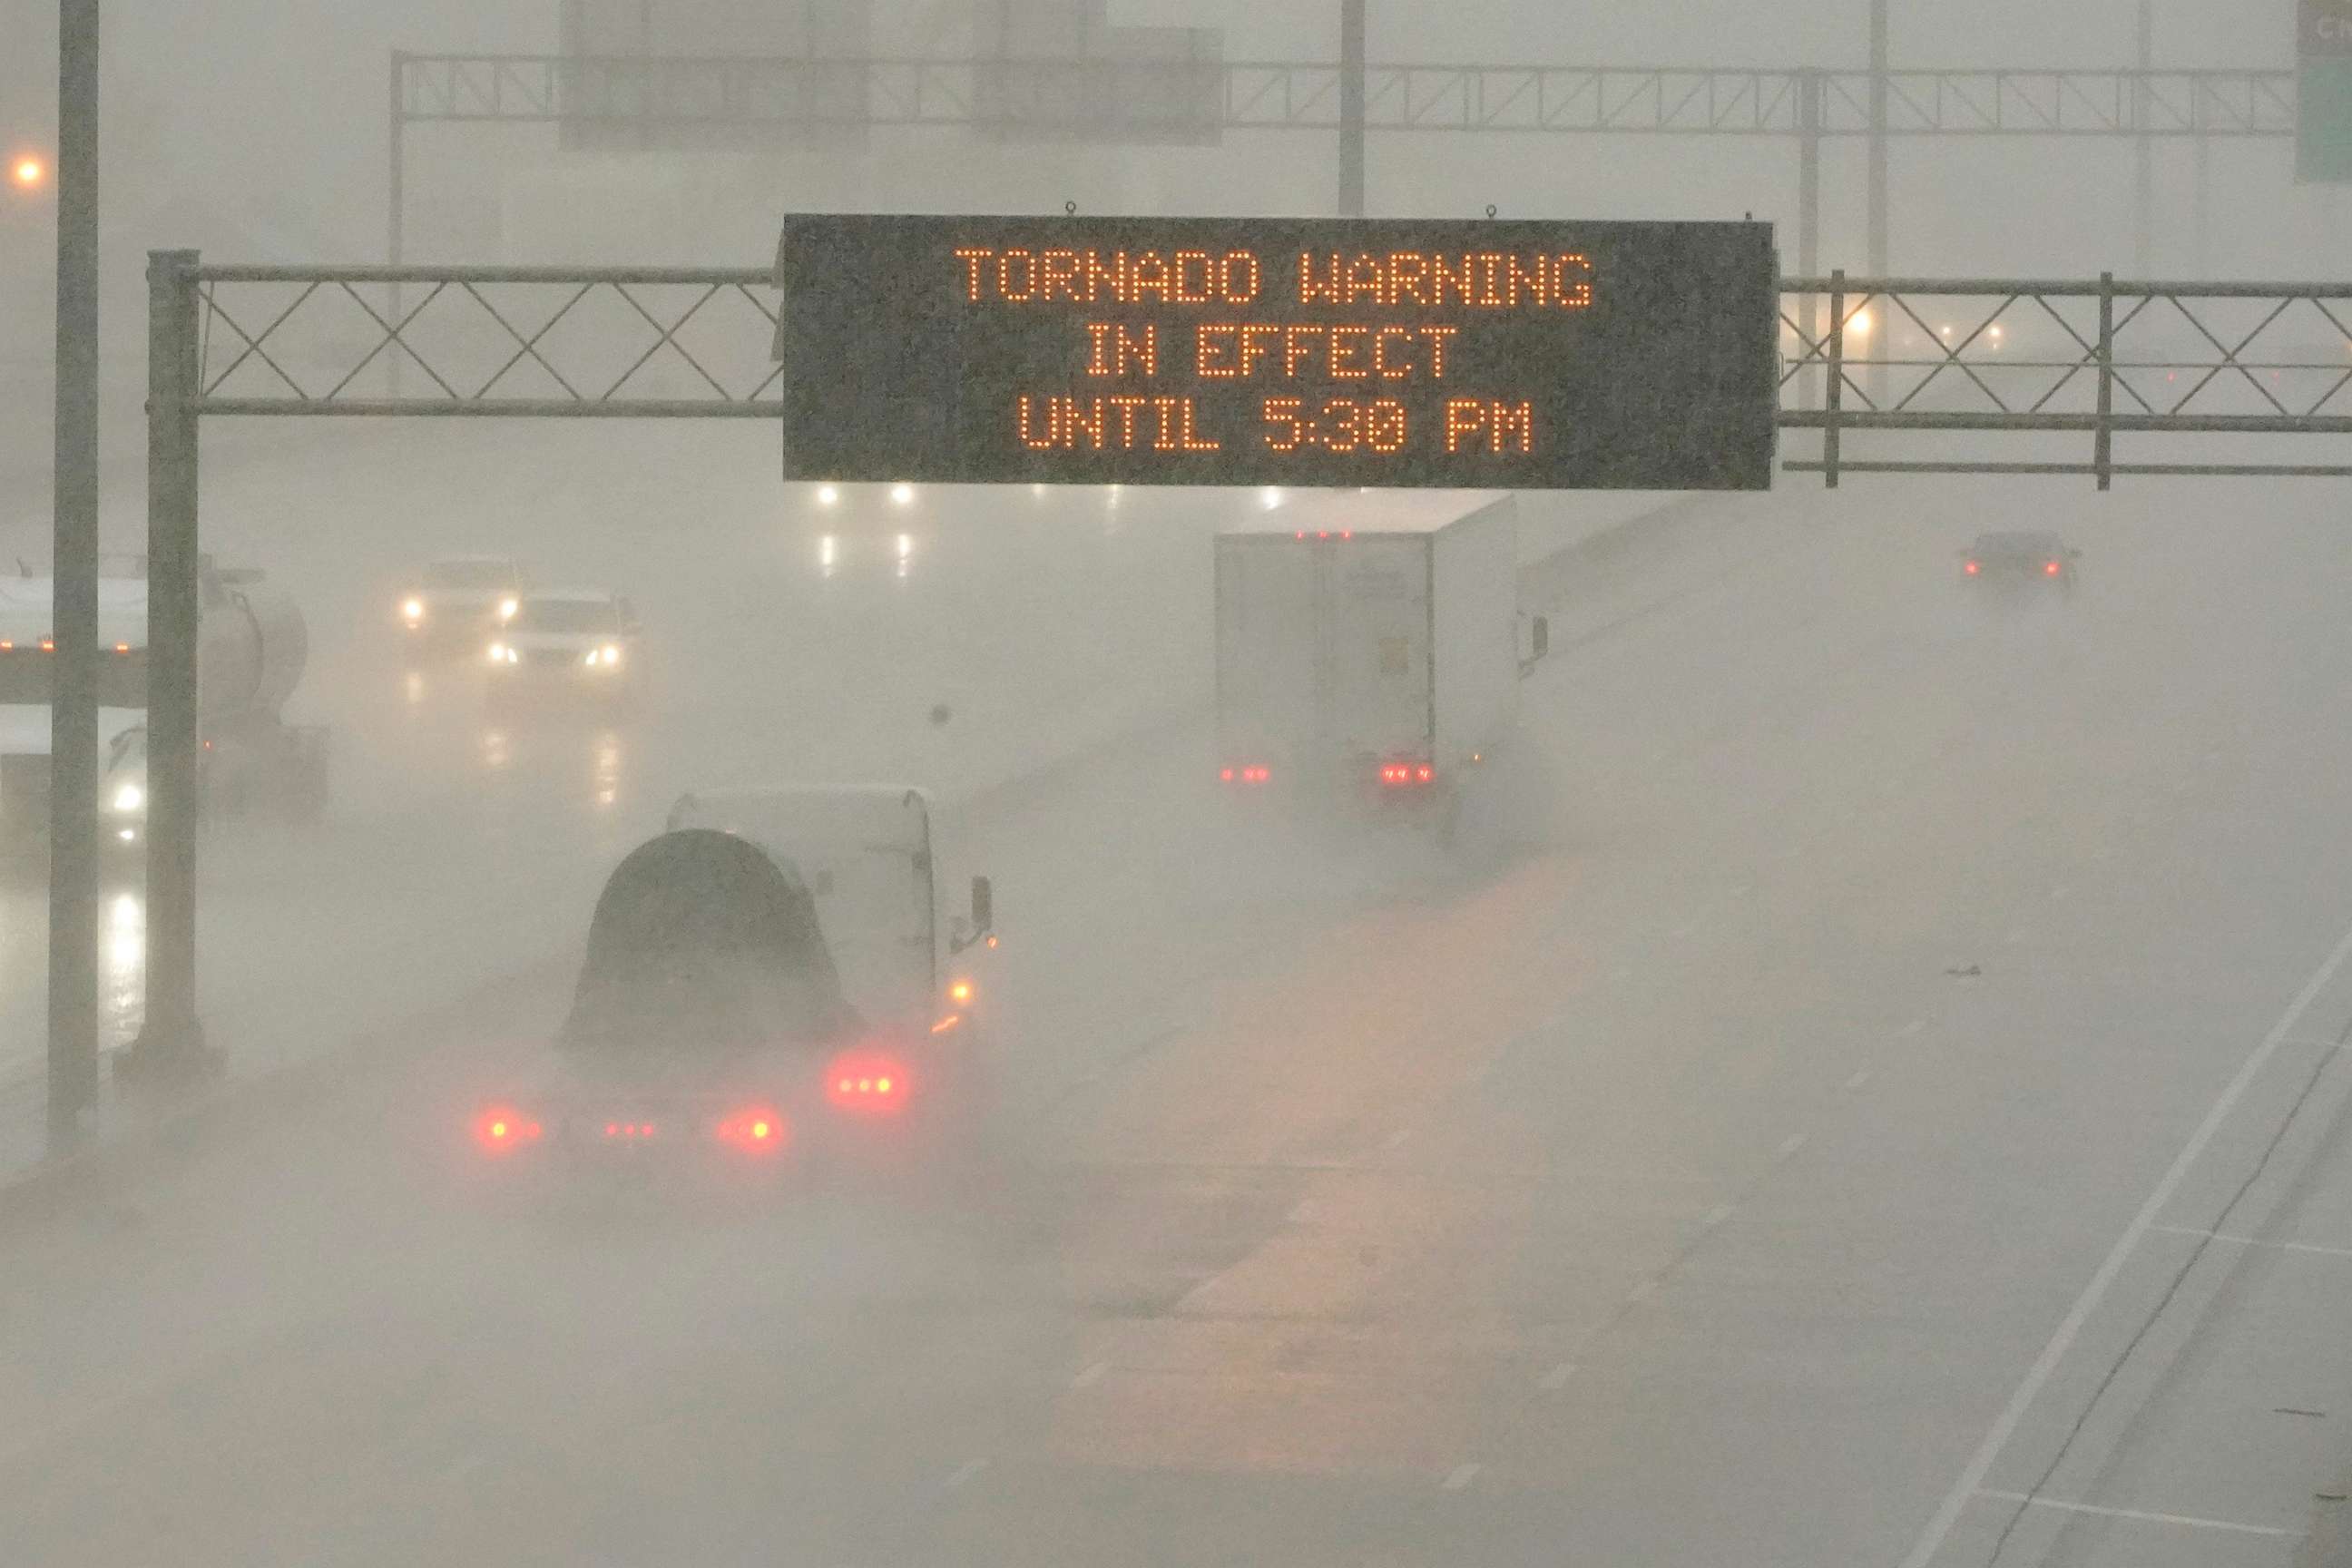 PHOTO: A message board warns drivers along I-55 southbound in Jackson, Mississippi of a tornado warning during an outbreak of severe weather, March 30, 2022.